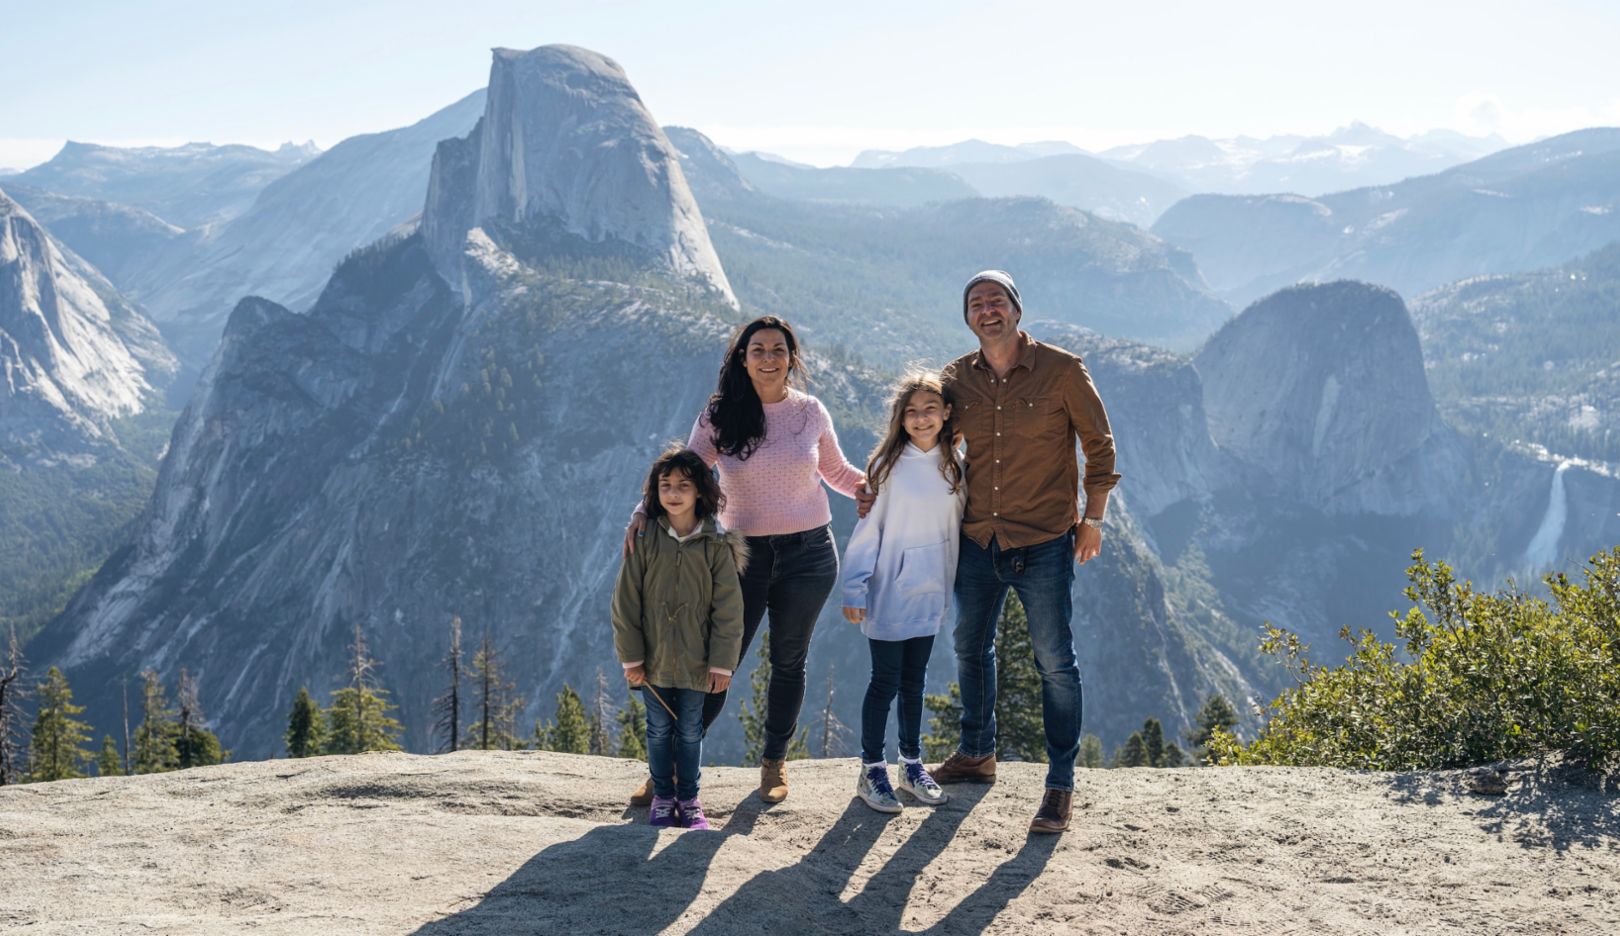 With his wife Mirabai and his daughters Adeline and Charlotte, John Chuldenko traveled through Yosemite National Park. He shares his experiences during his family drive in the Porsche Taycan 4 Cross Turismo.